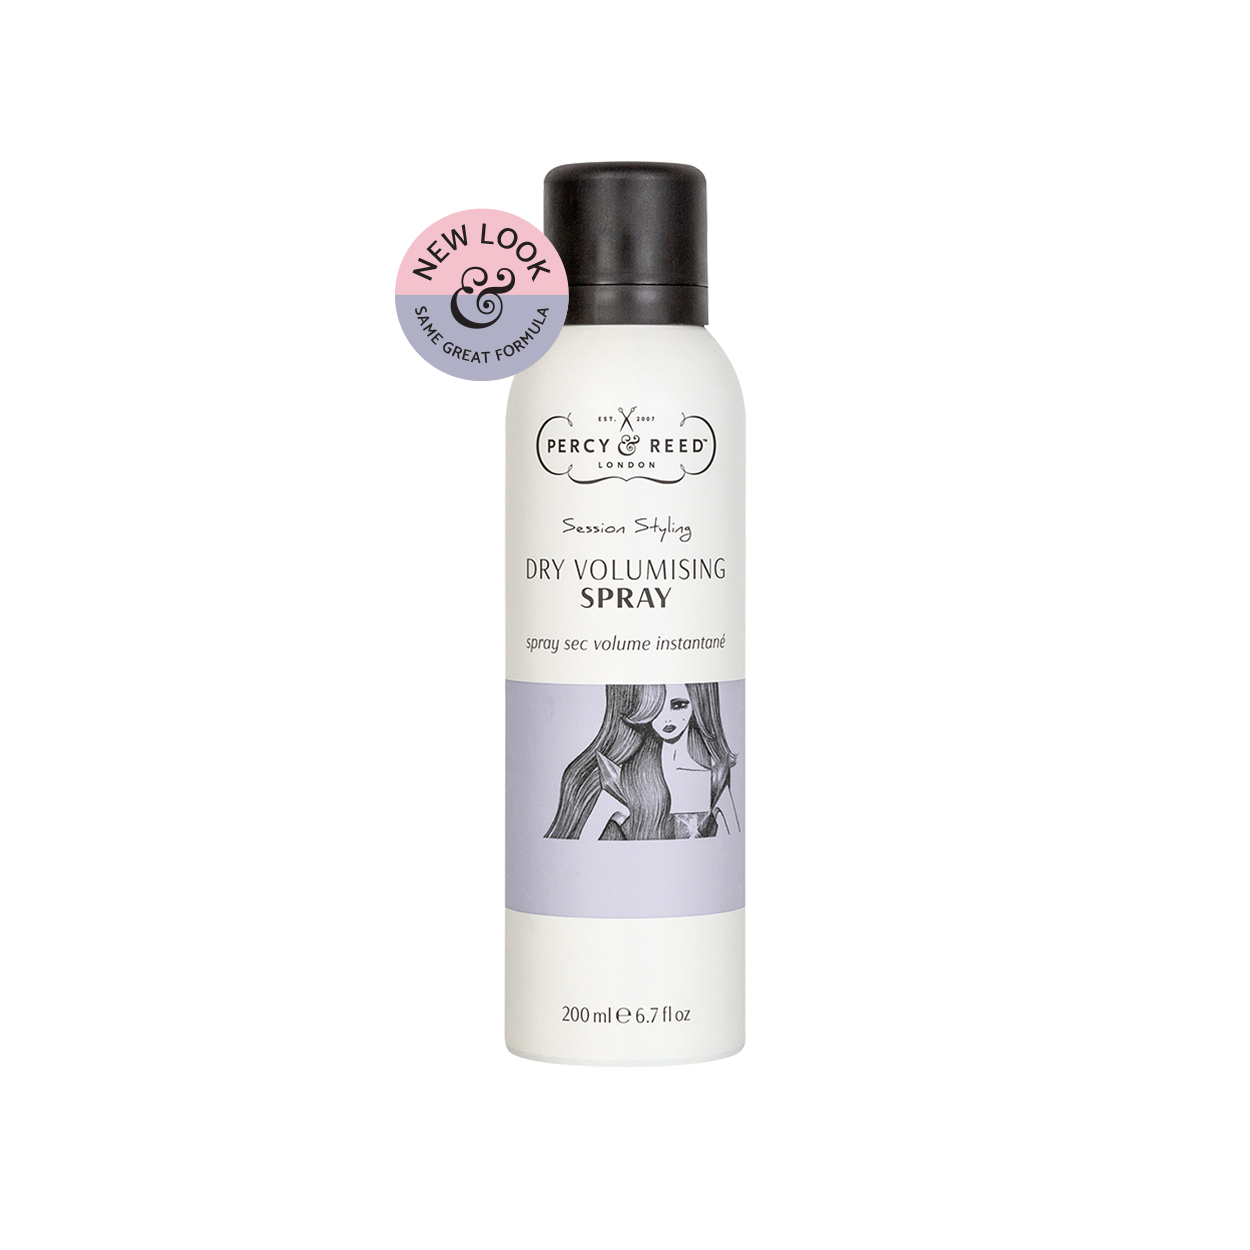 Percy & Reed Session Styling Dry Volumising Spray